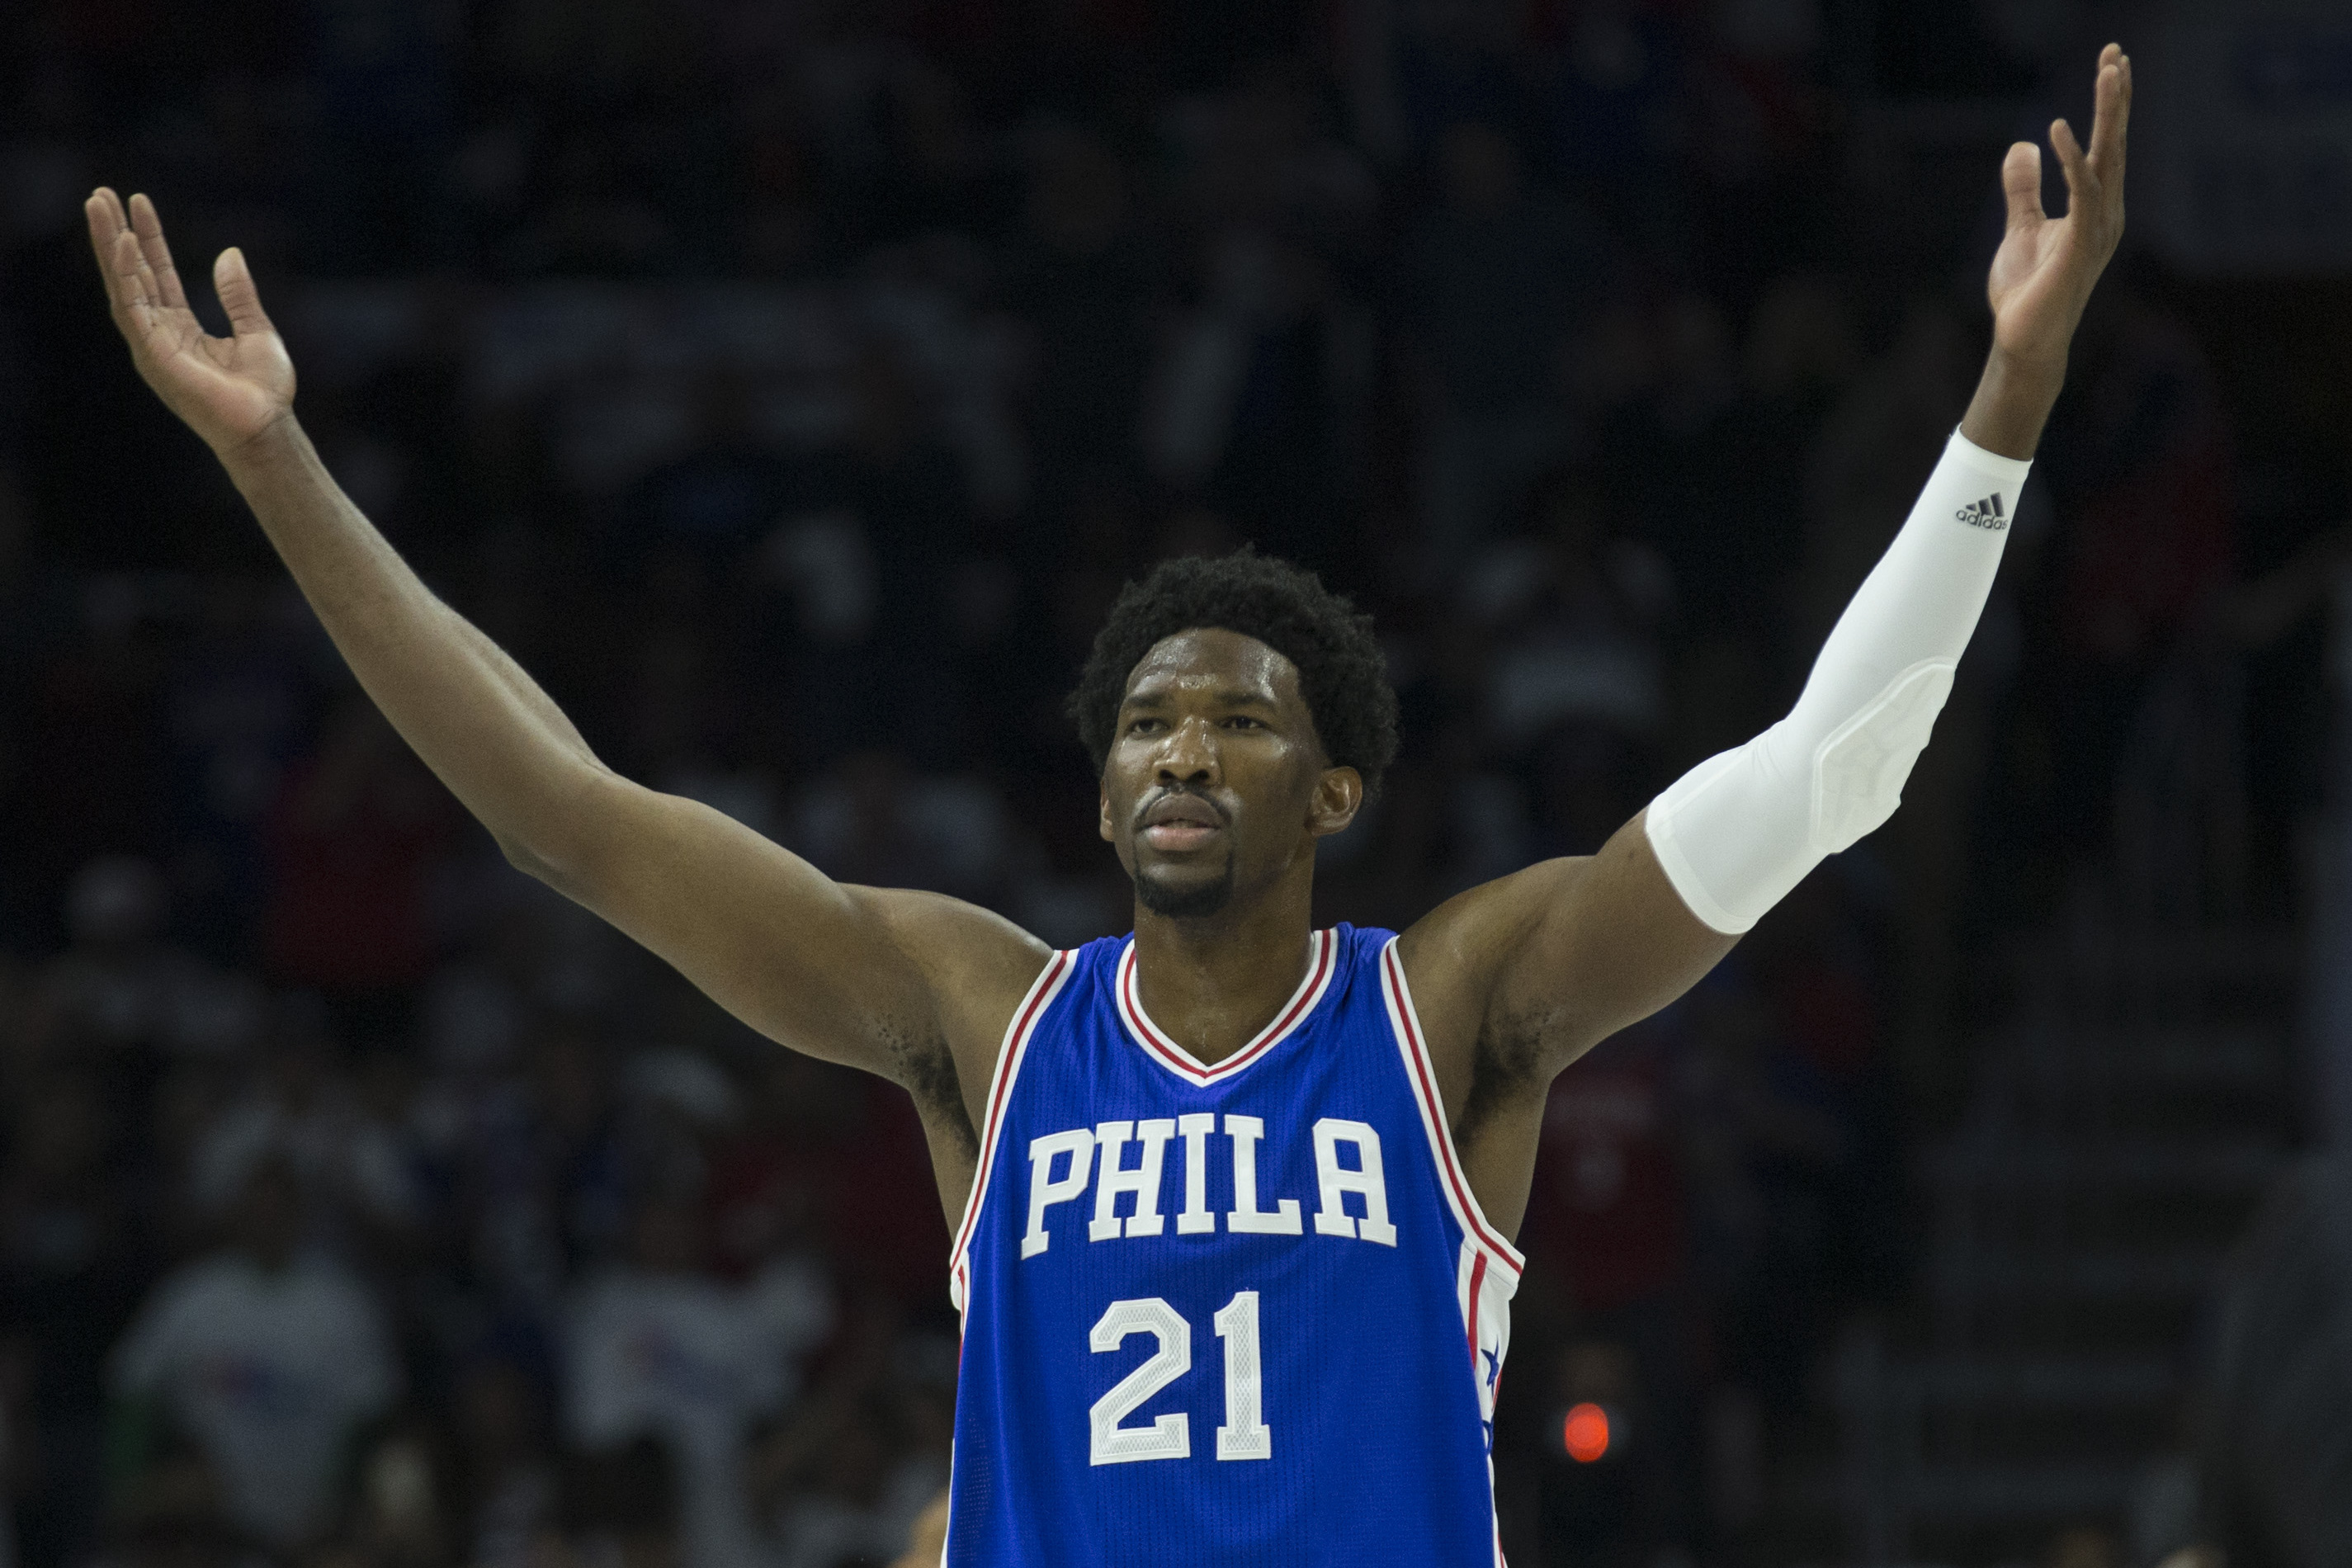 Joel Embiid NBA Draft 2014: Highlights, Scouting Report for 76ers